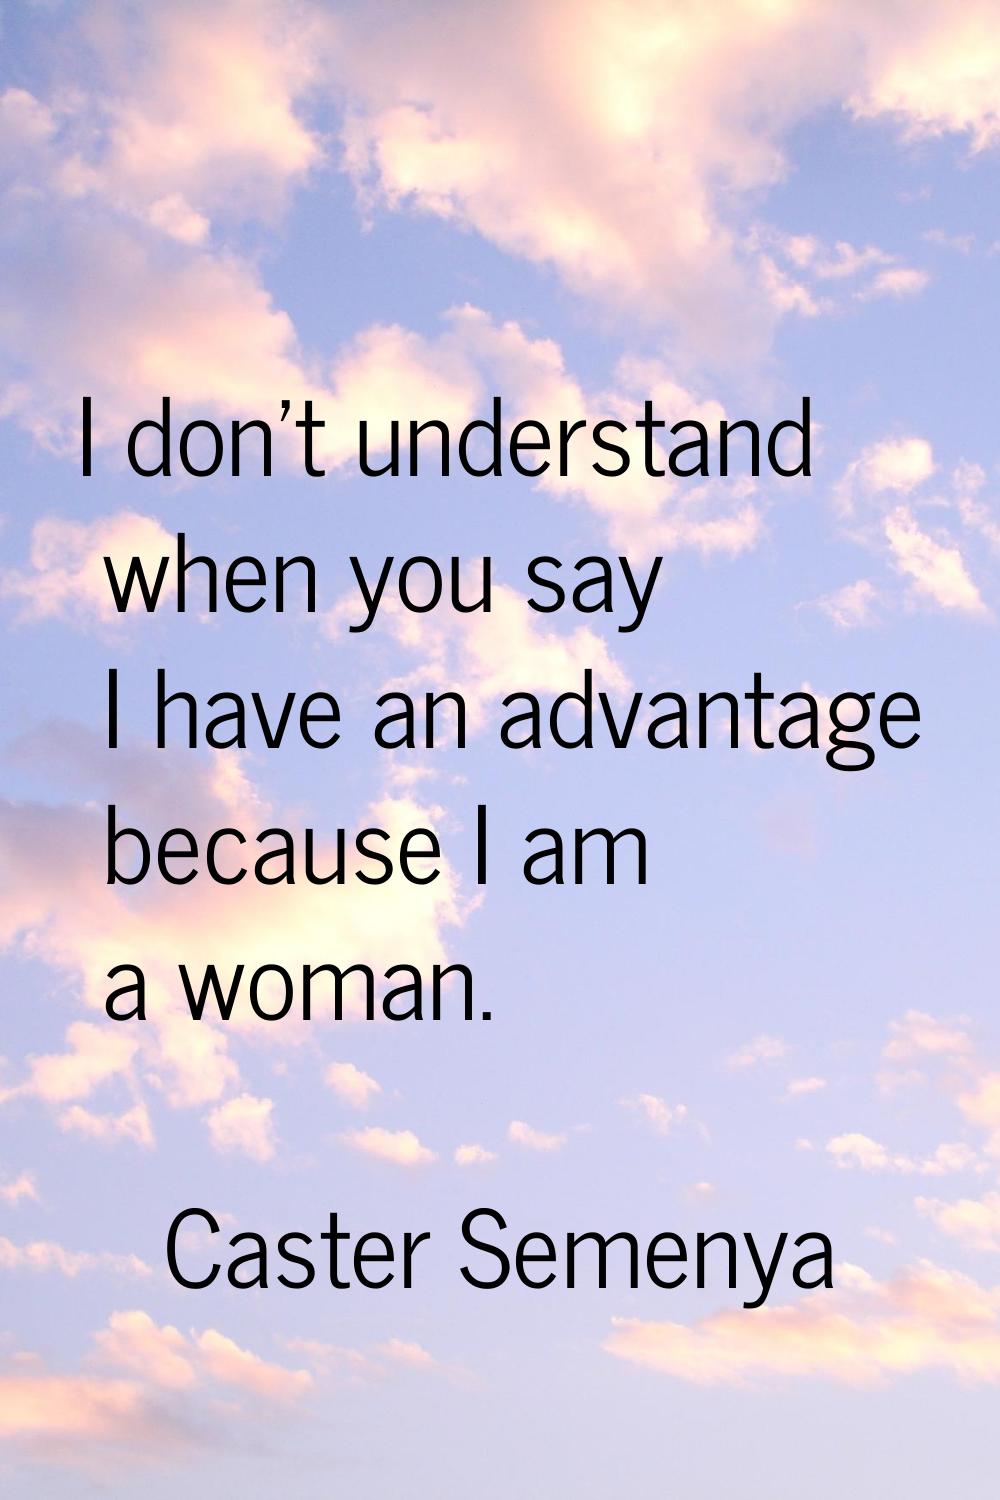 I don't understand when you say I have an advantage because I am a woman.